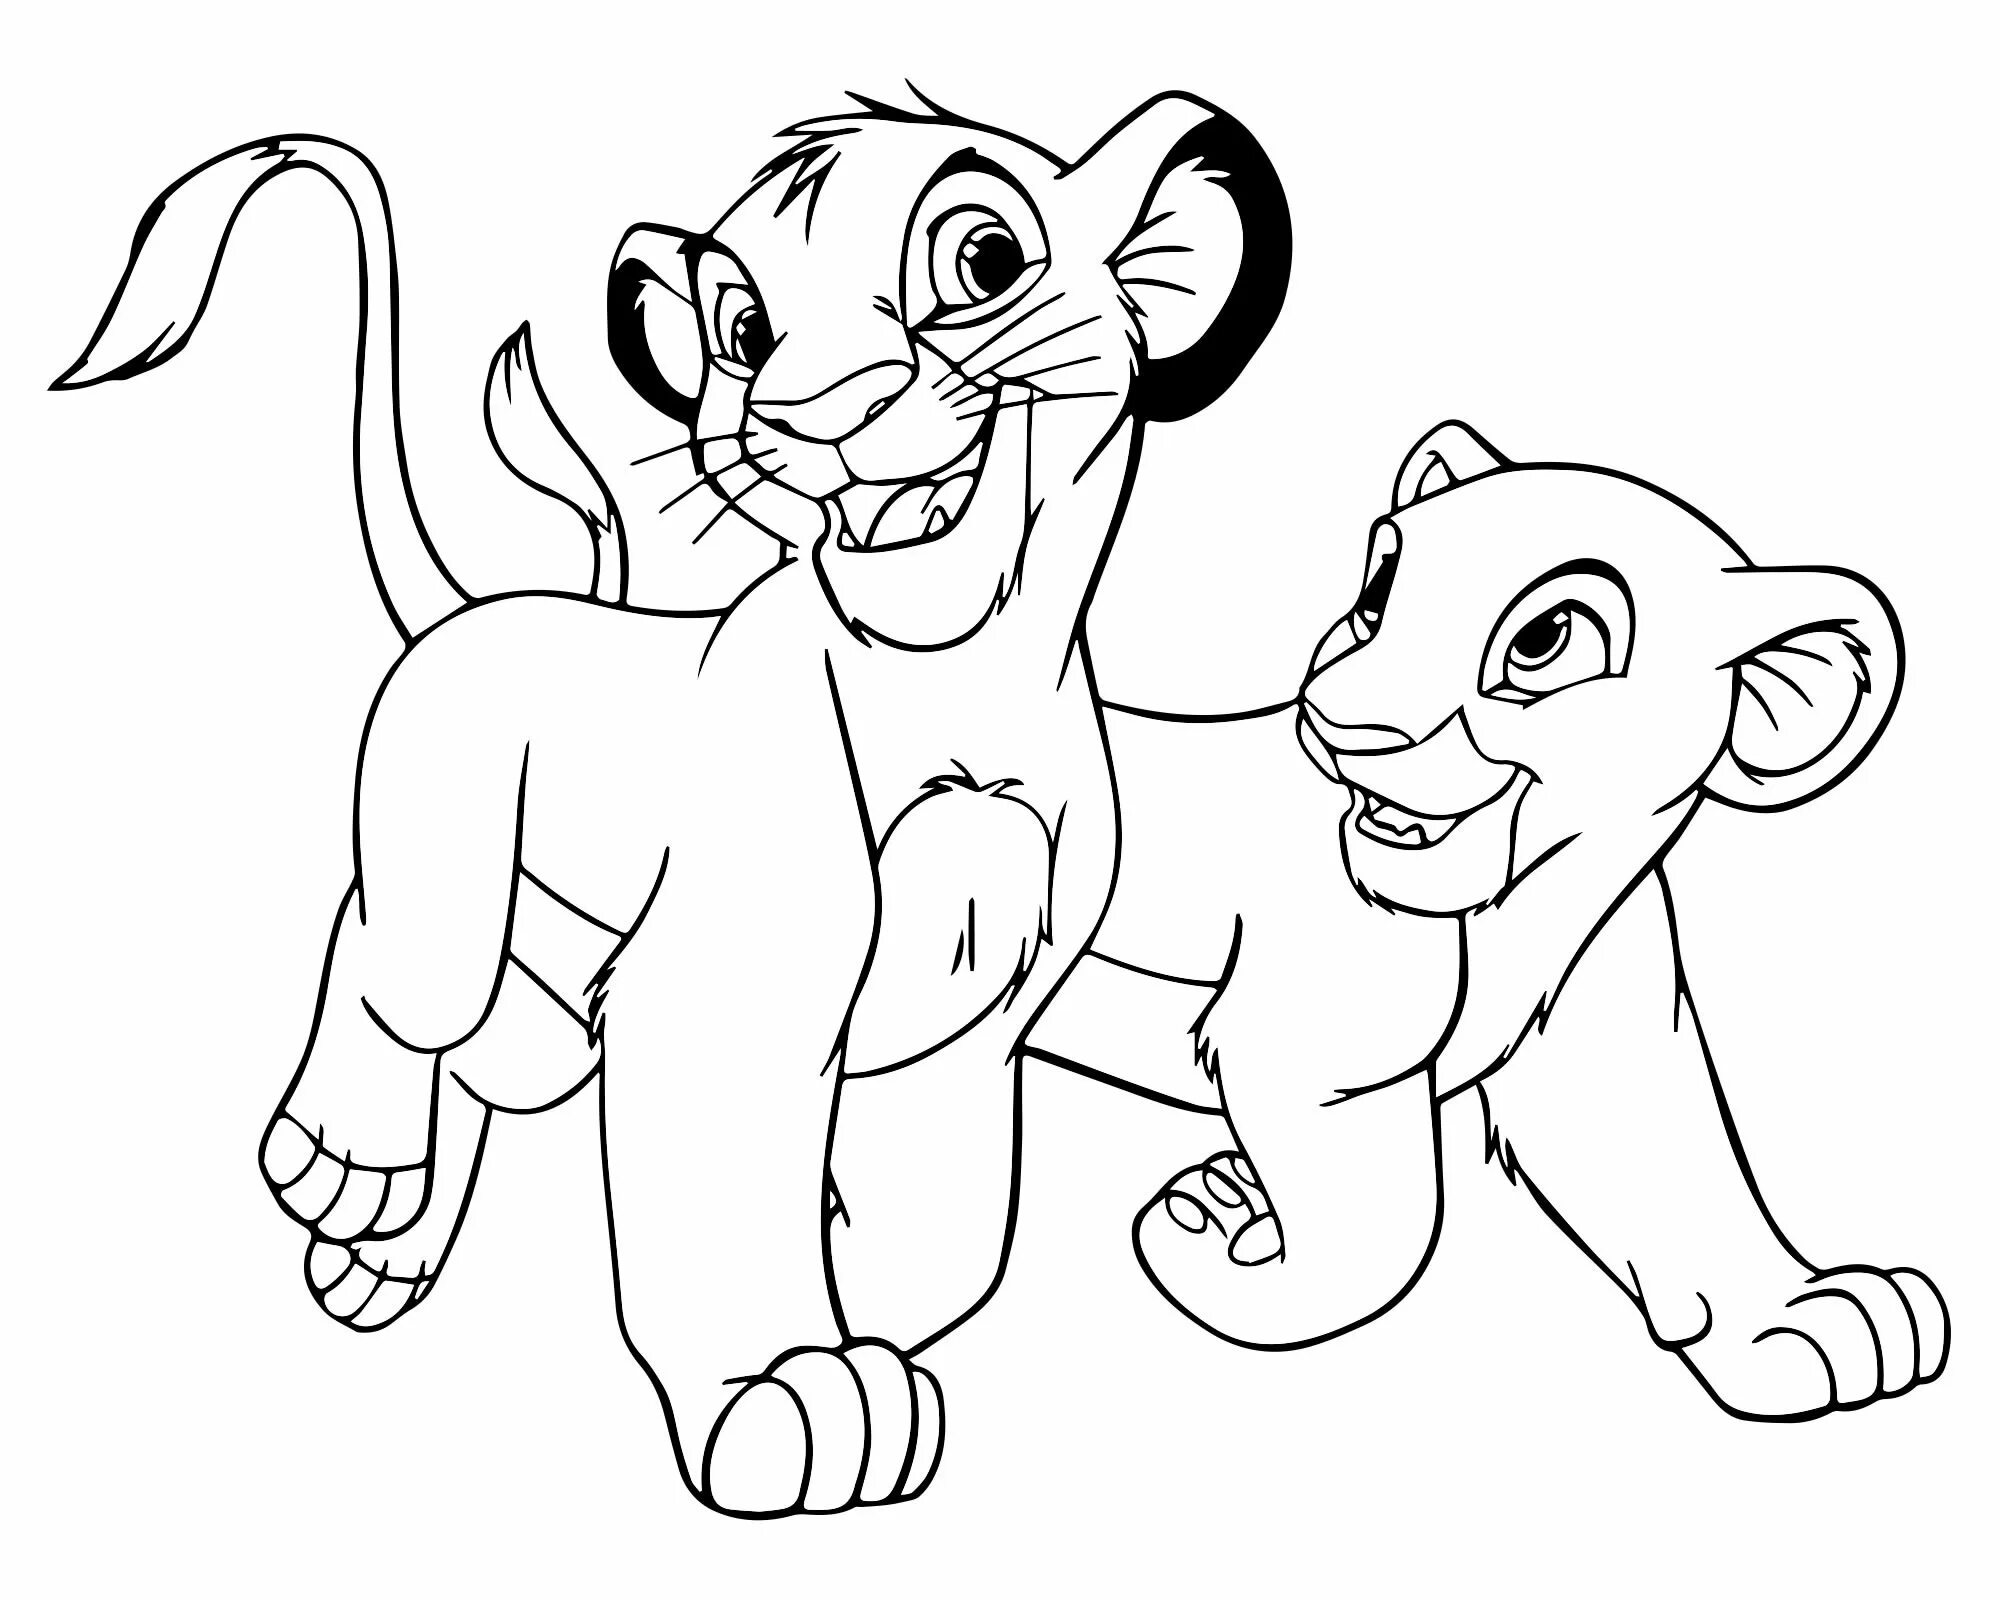 The lion king for kids #2